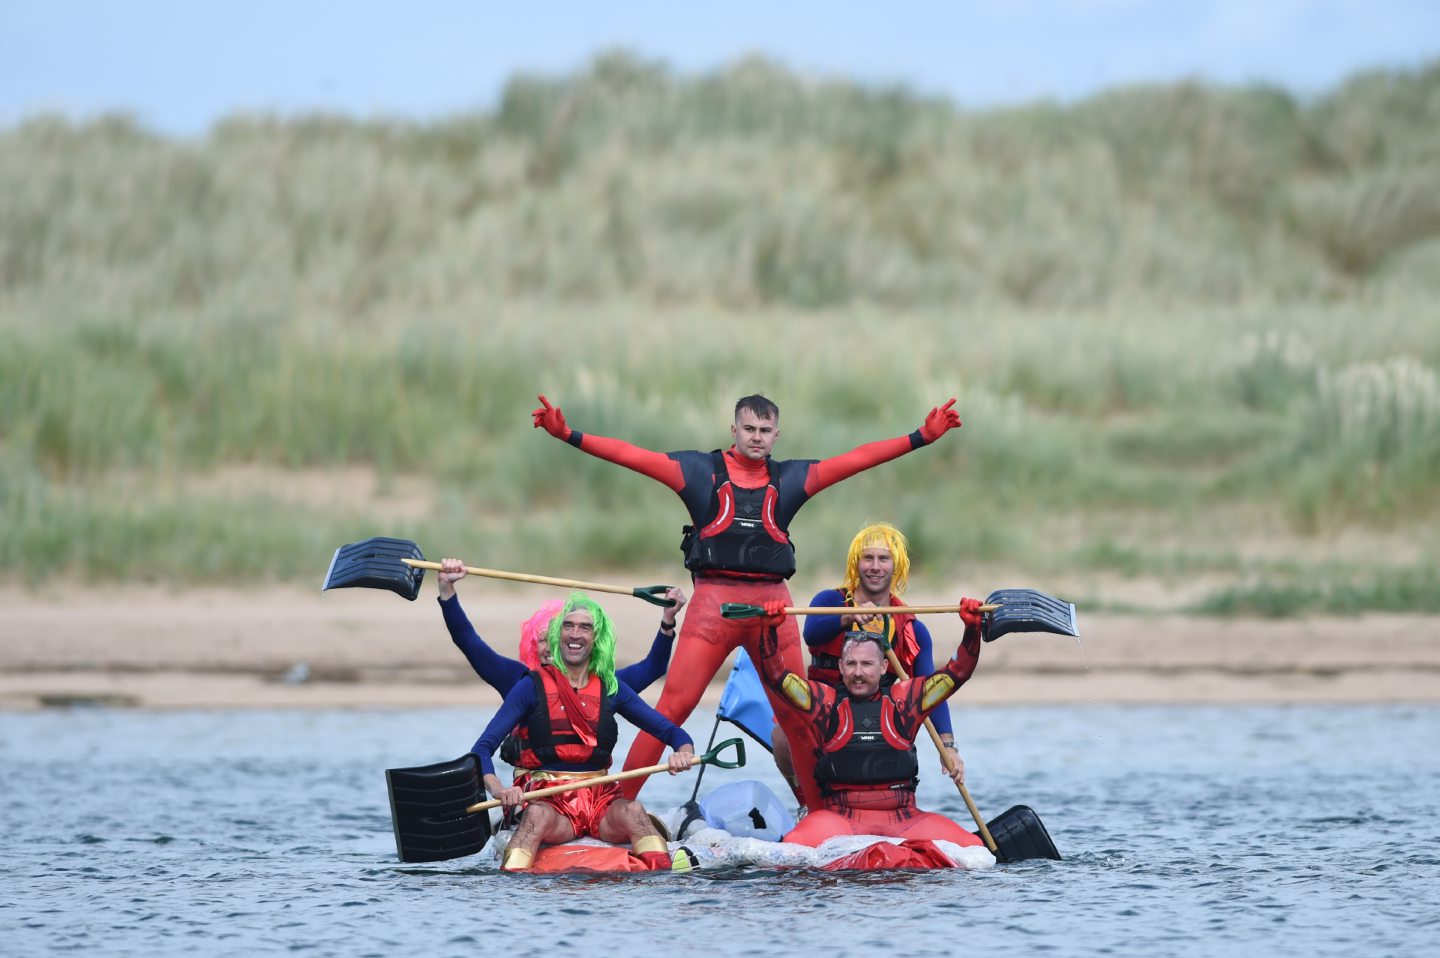 The 42nd Lossiemouth Raft Race drew huge crowds. Pictures by JASON HEDGES